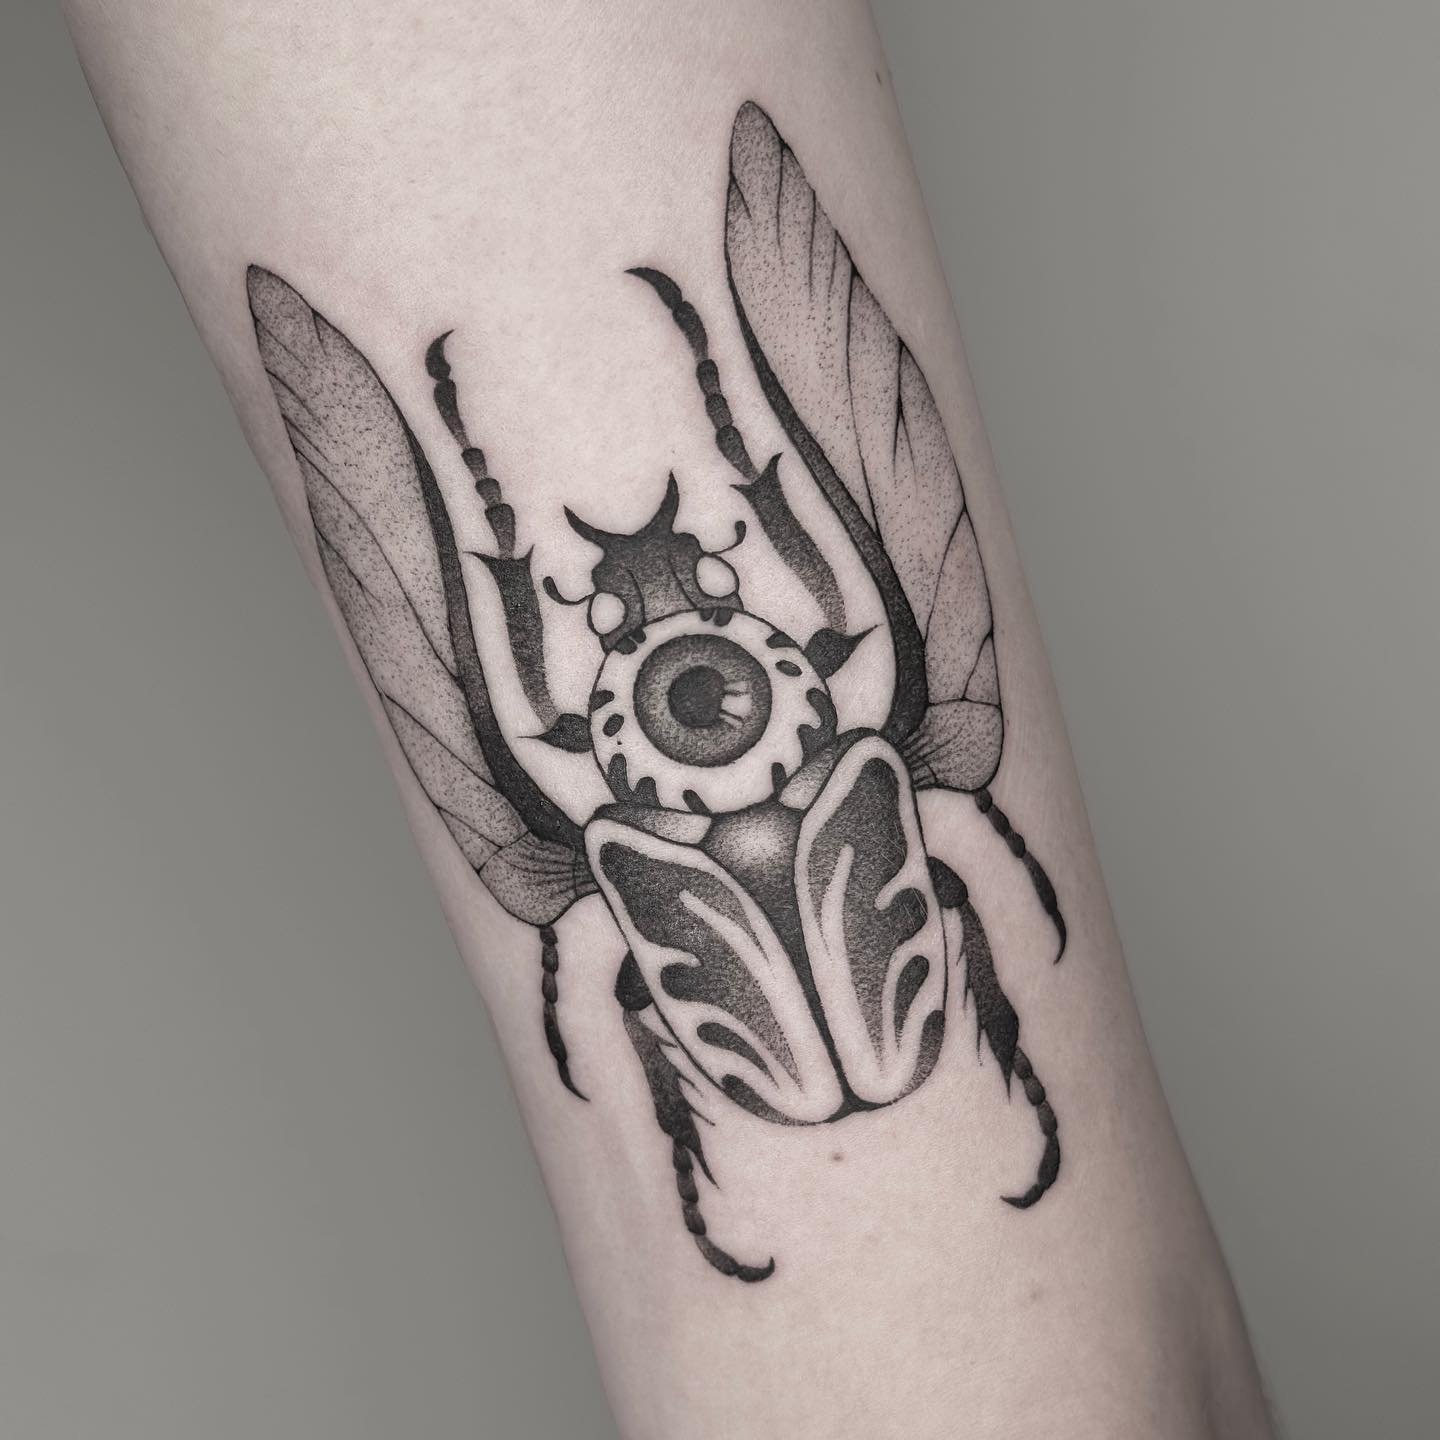 Insect tattoo on forearm by alabast too